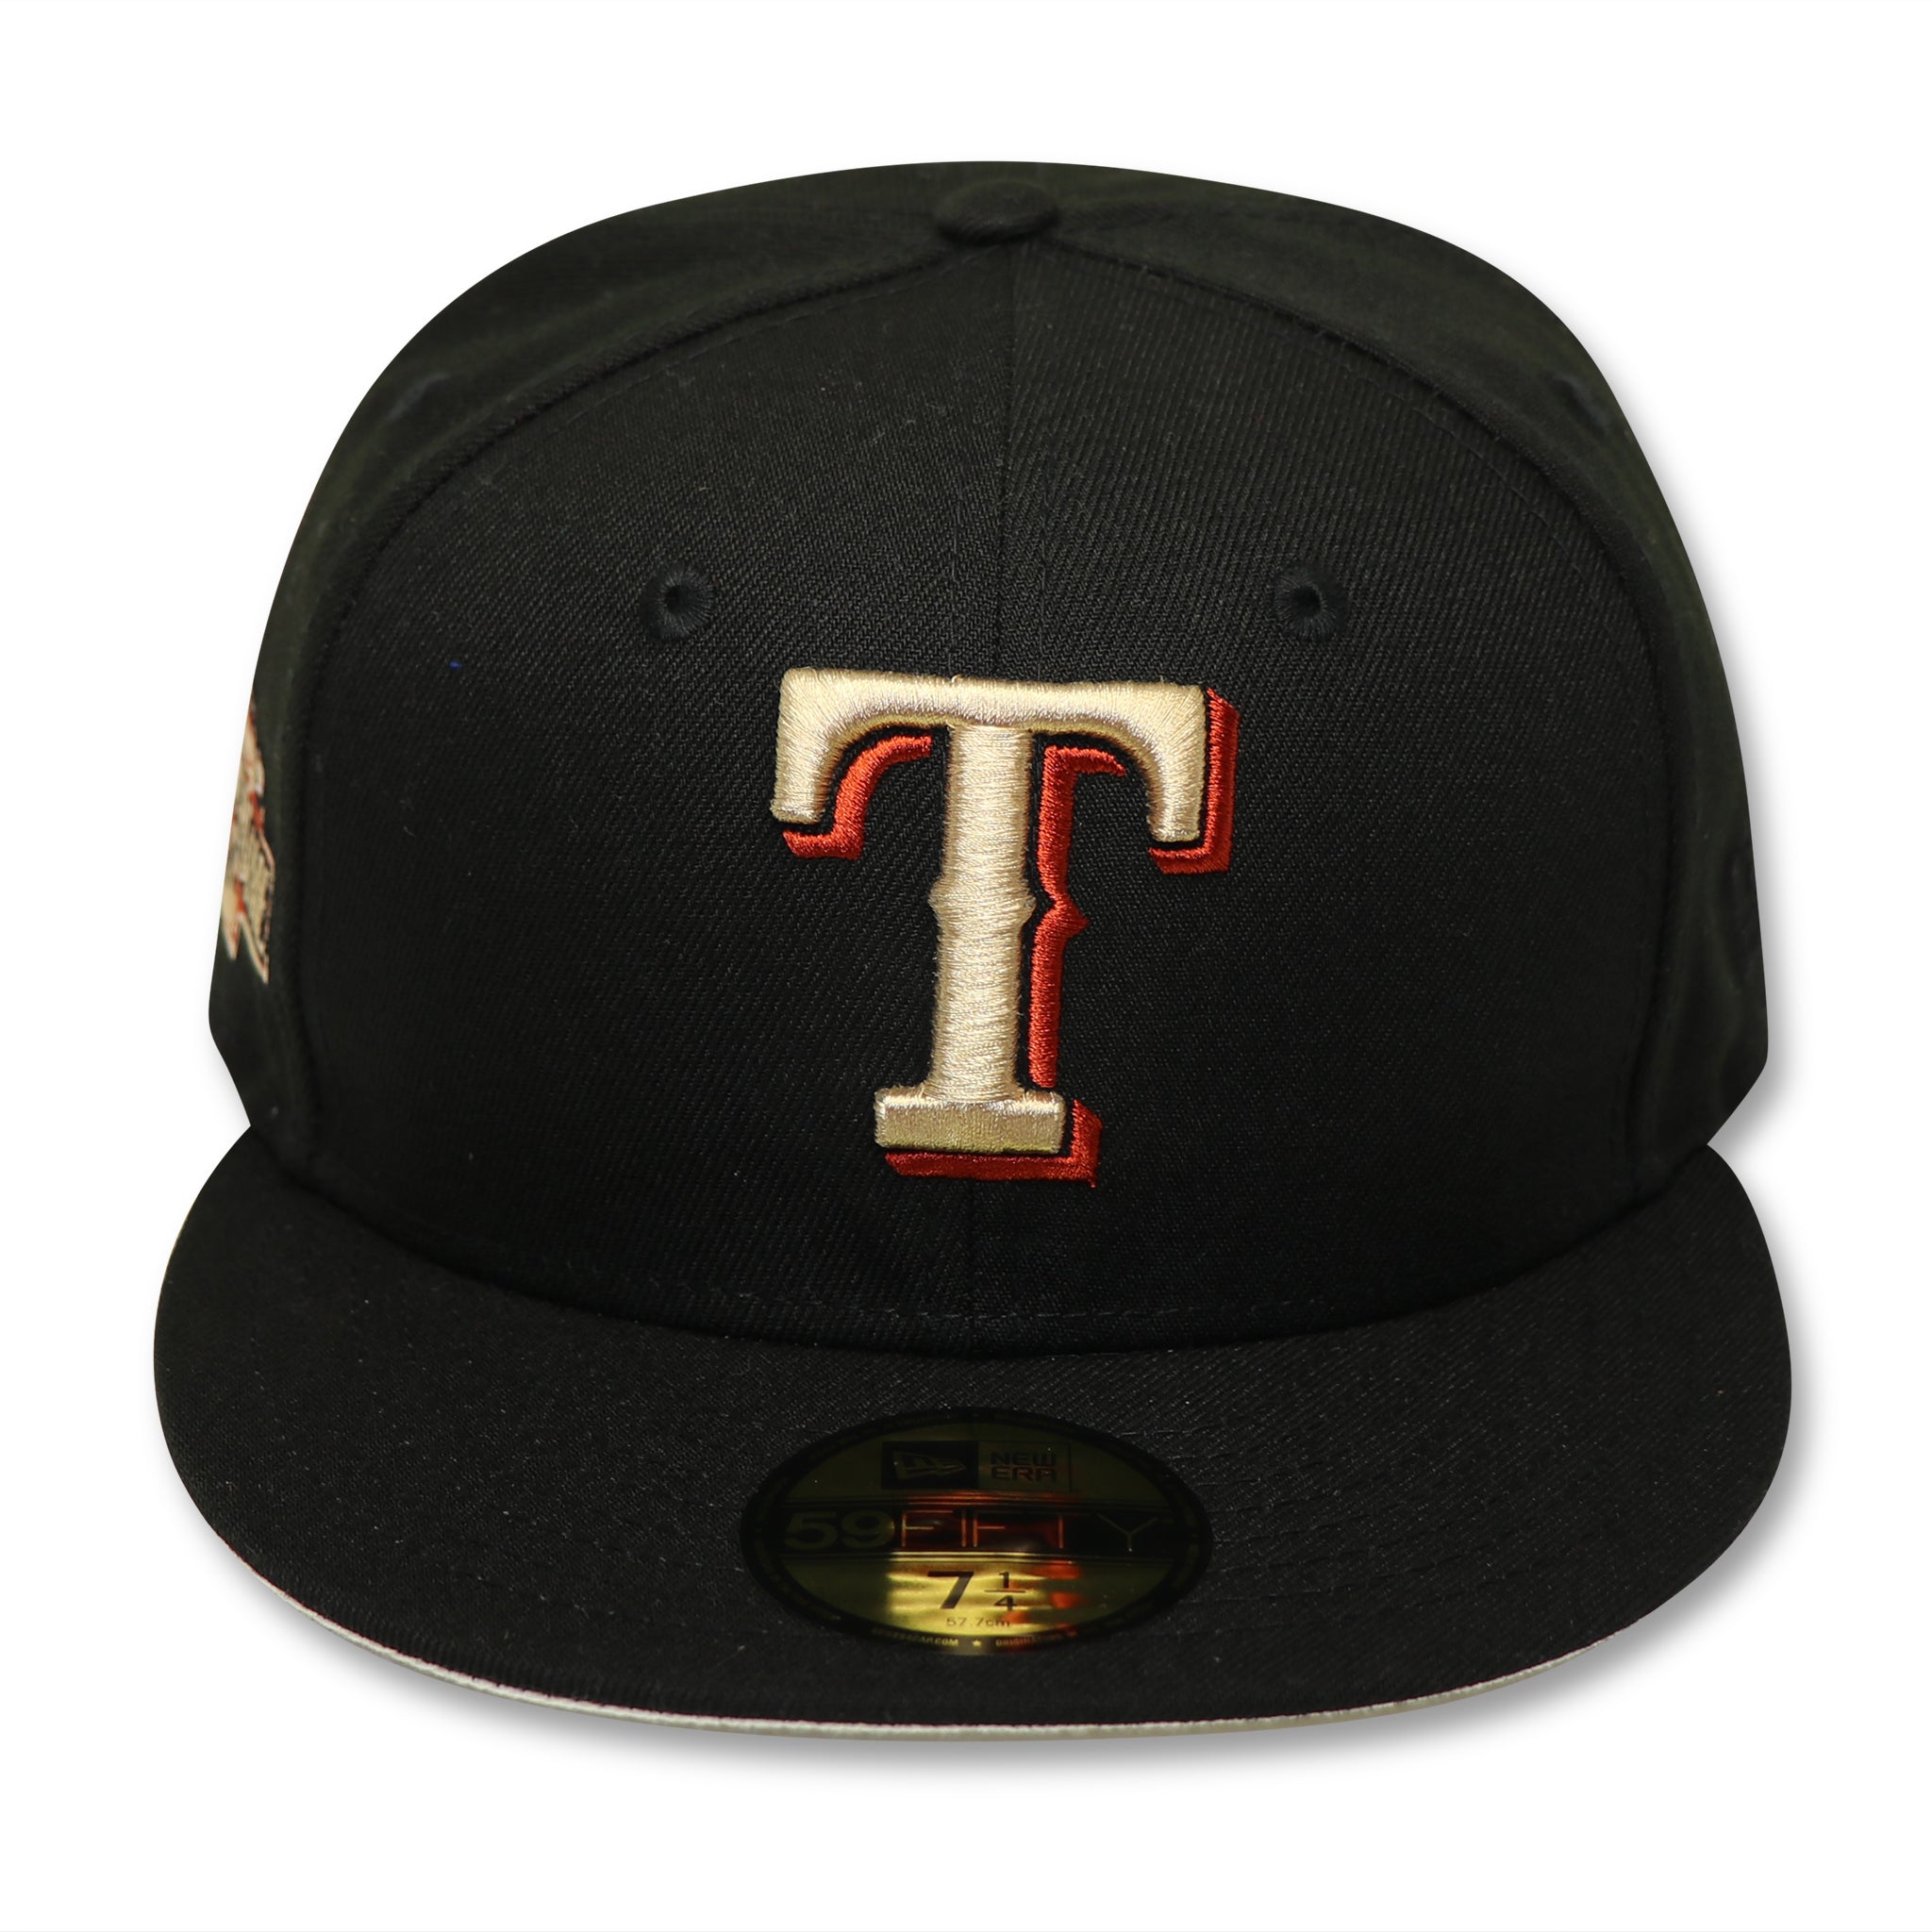 TEXAS RANGERS (2004 ASG) "REVERSE RIVALRY" NEW ERA 59FIFTY FITTED (SEASHELL UNDER VISOR))